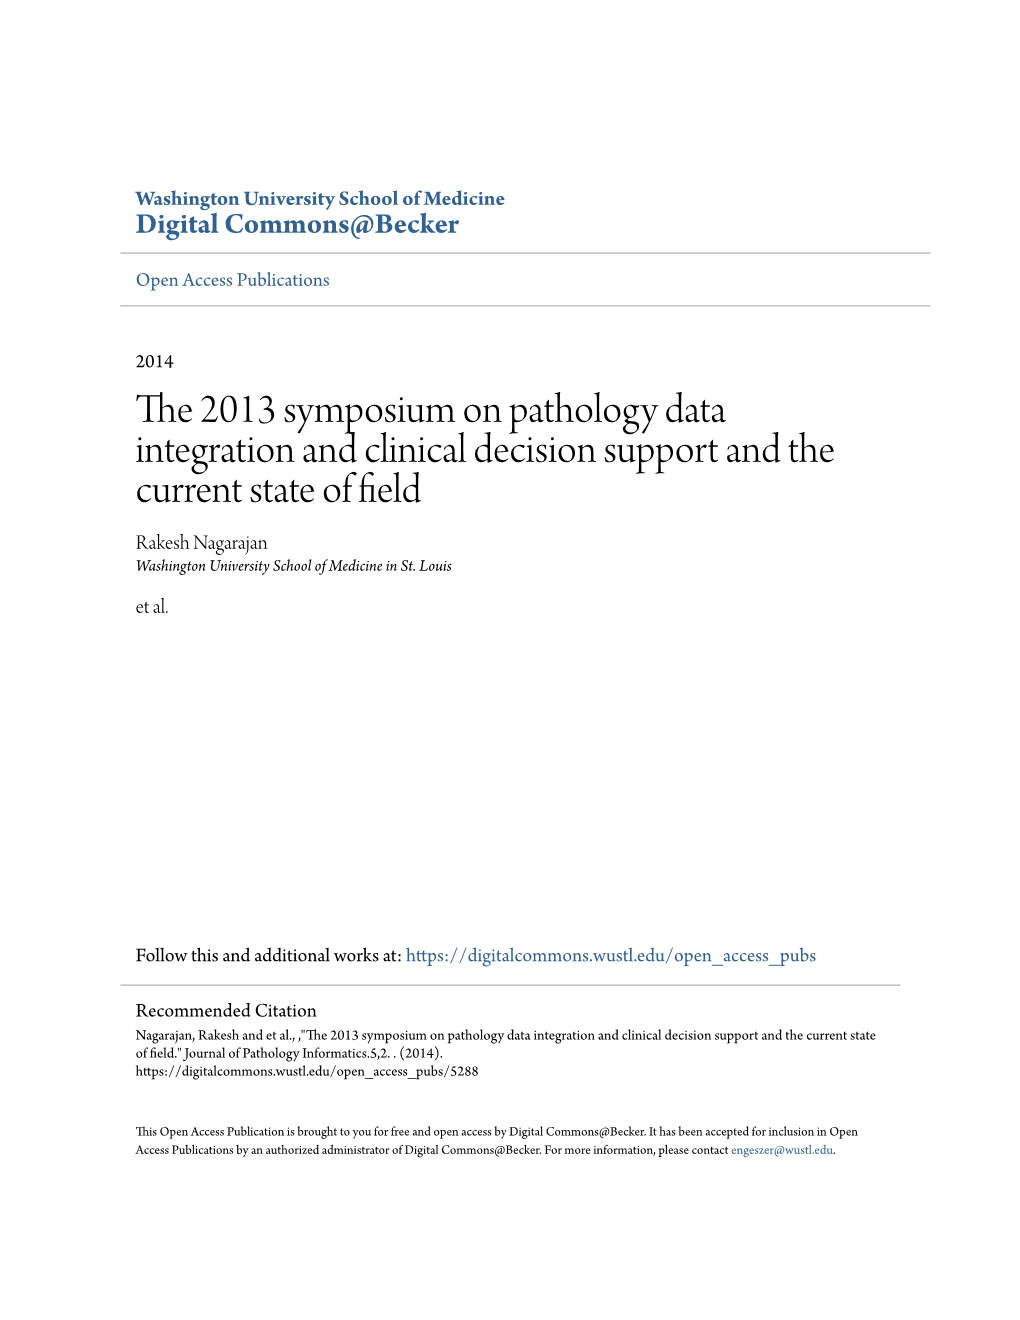 The 2013 Symposium on Pathology Data Integration and Clinical Decision Support and the Current State of Field